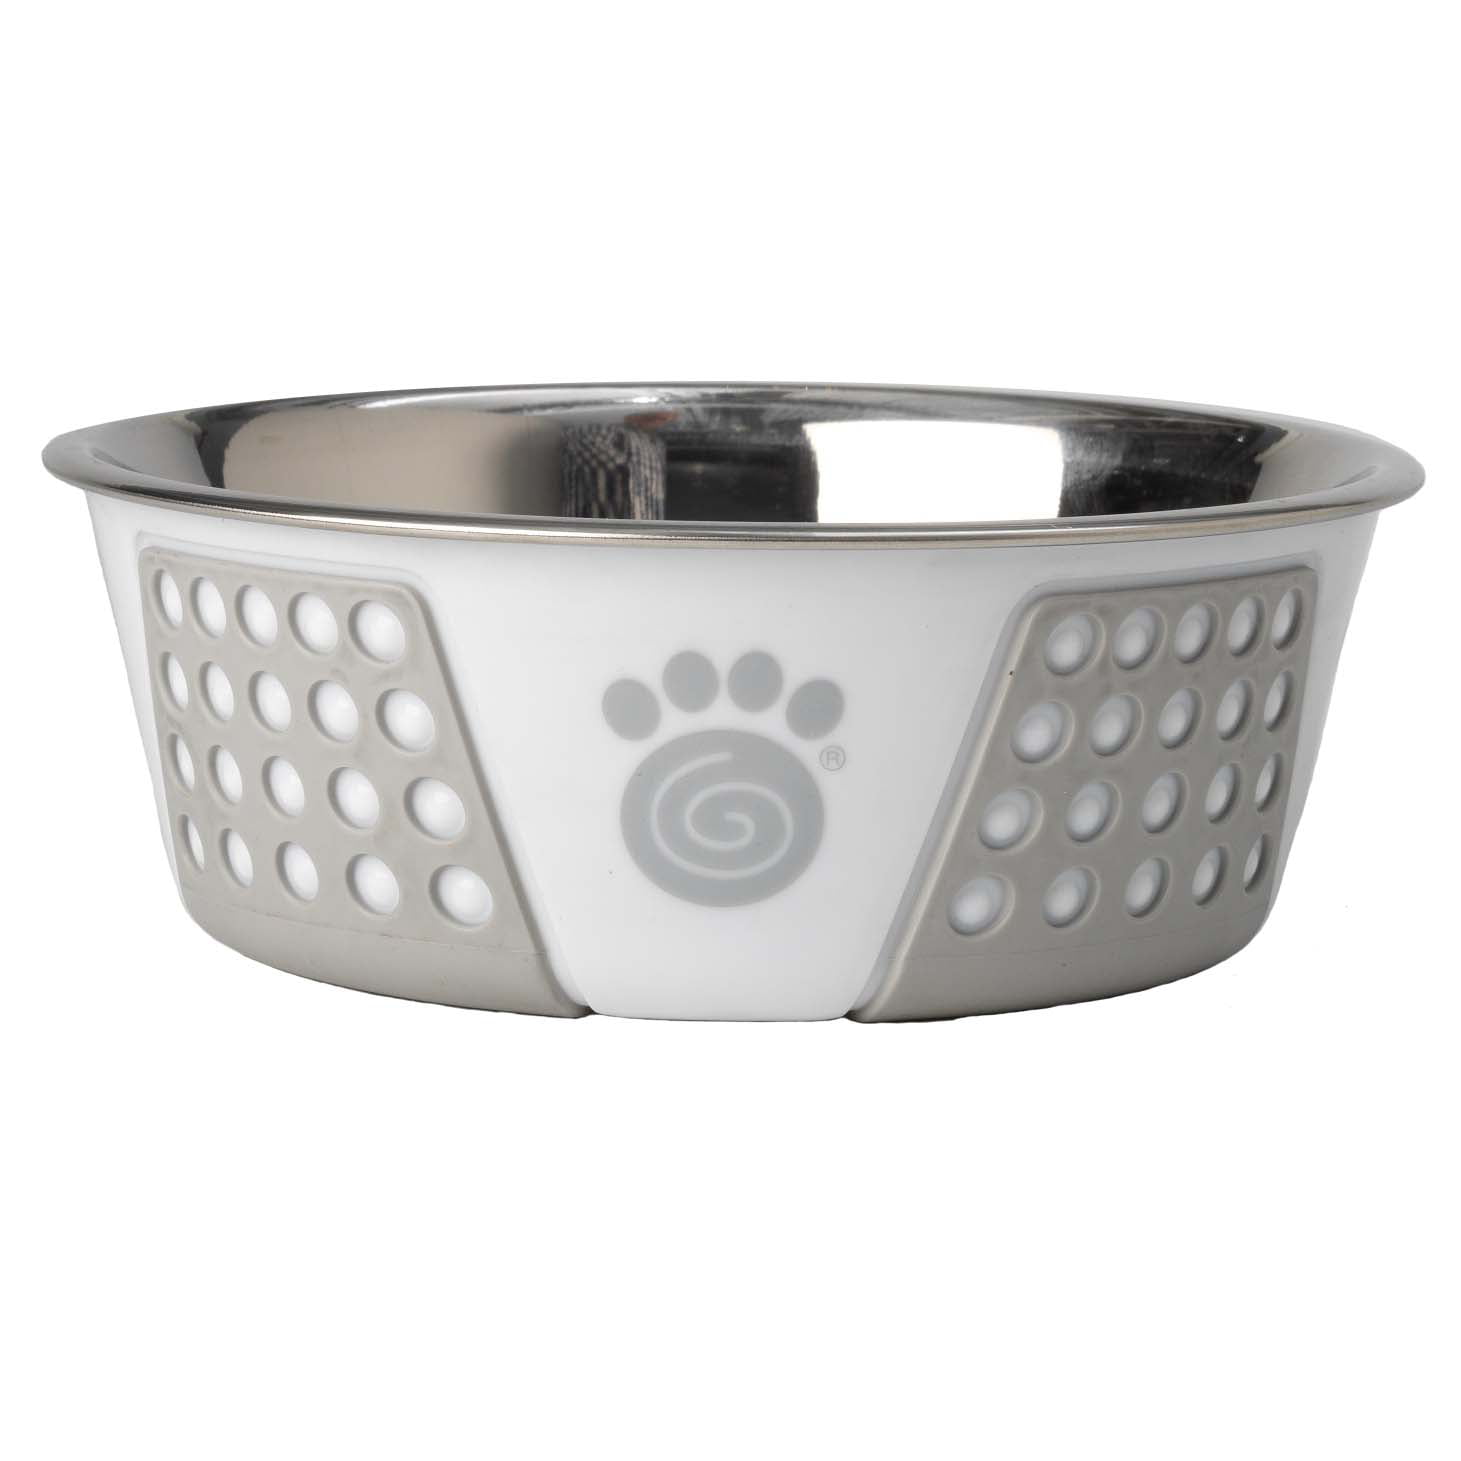 PetRageous 16011 Kona Stainless-Steel Non-Slip Dishwasher Safe Bowl 6.5-Cup 8.5-Inch Diameter 2.75-Inch Tall for Large and Extra Large Dogs and Cats Antique White 